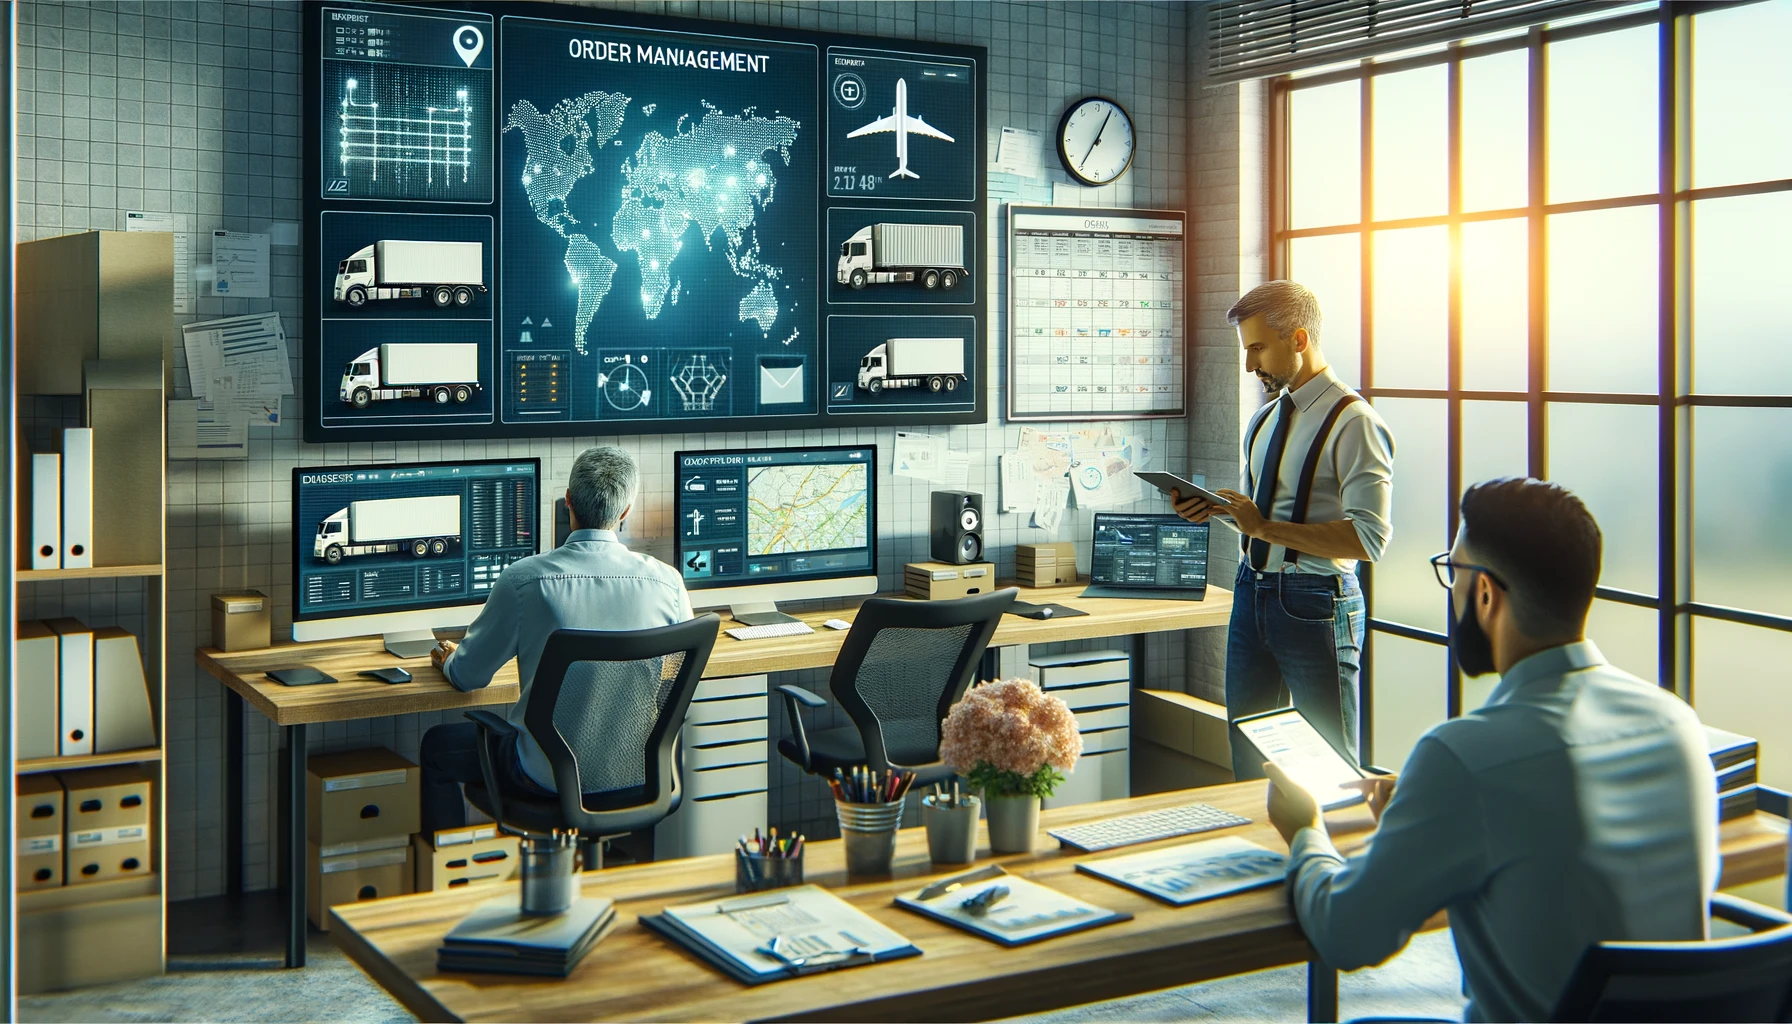 DALL·E 2024-04-12 14.49.52 - A modern logistics and transportation office scene depicting order management. The image shows a dispatcher at a desk with multiple monitors displayin